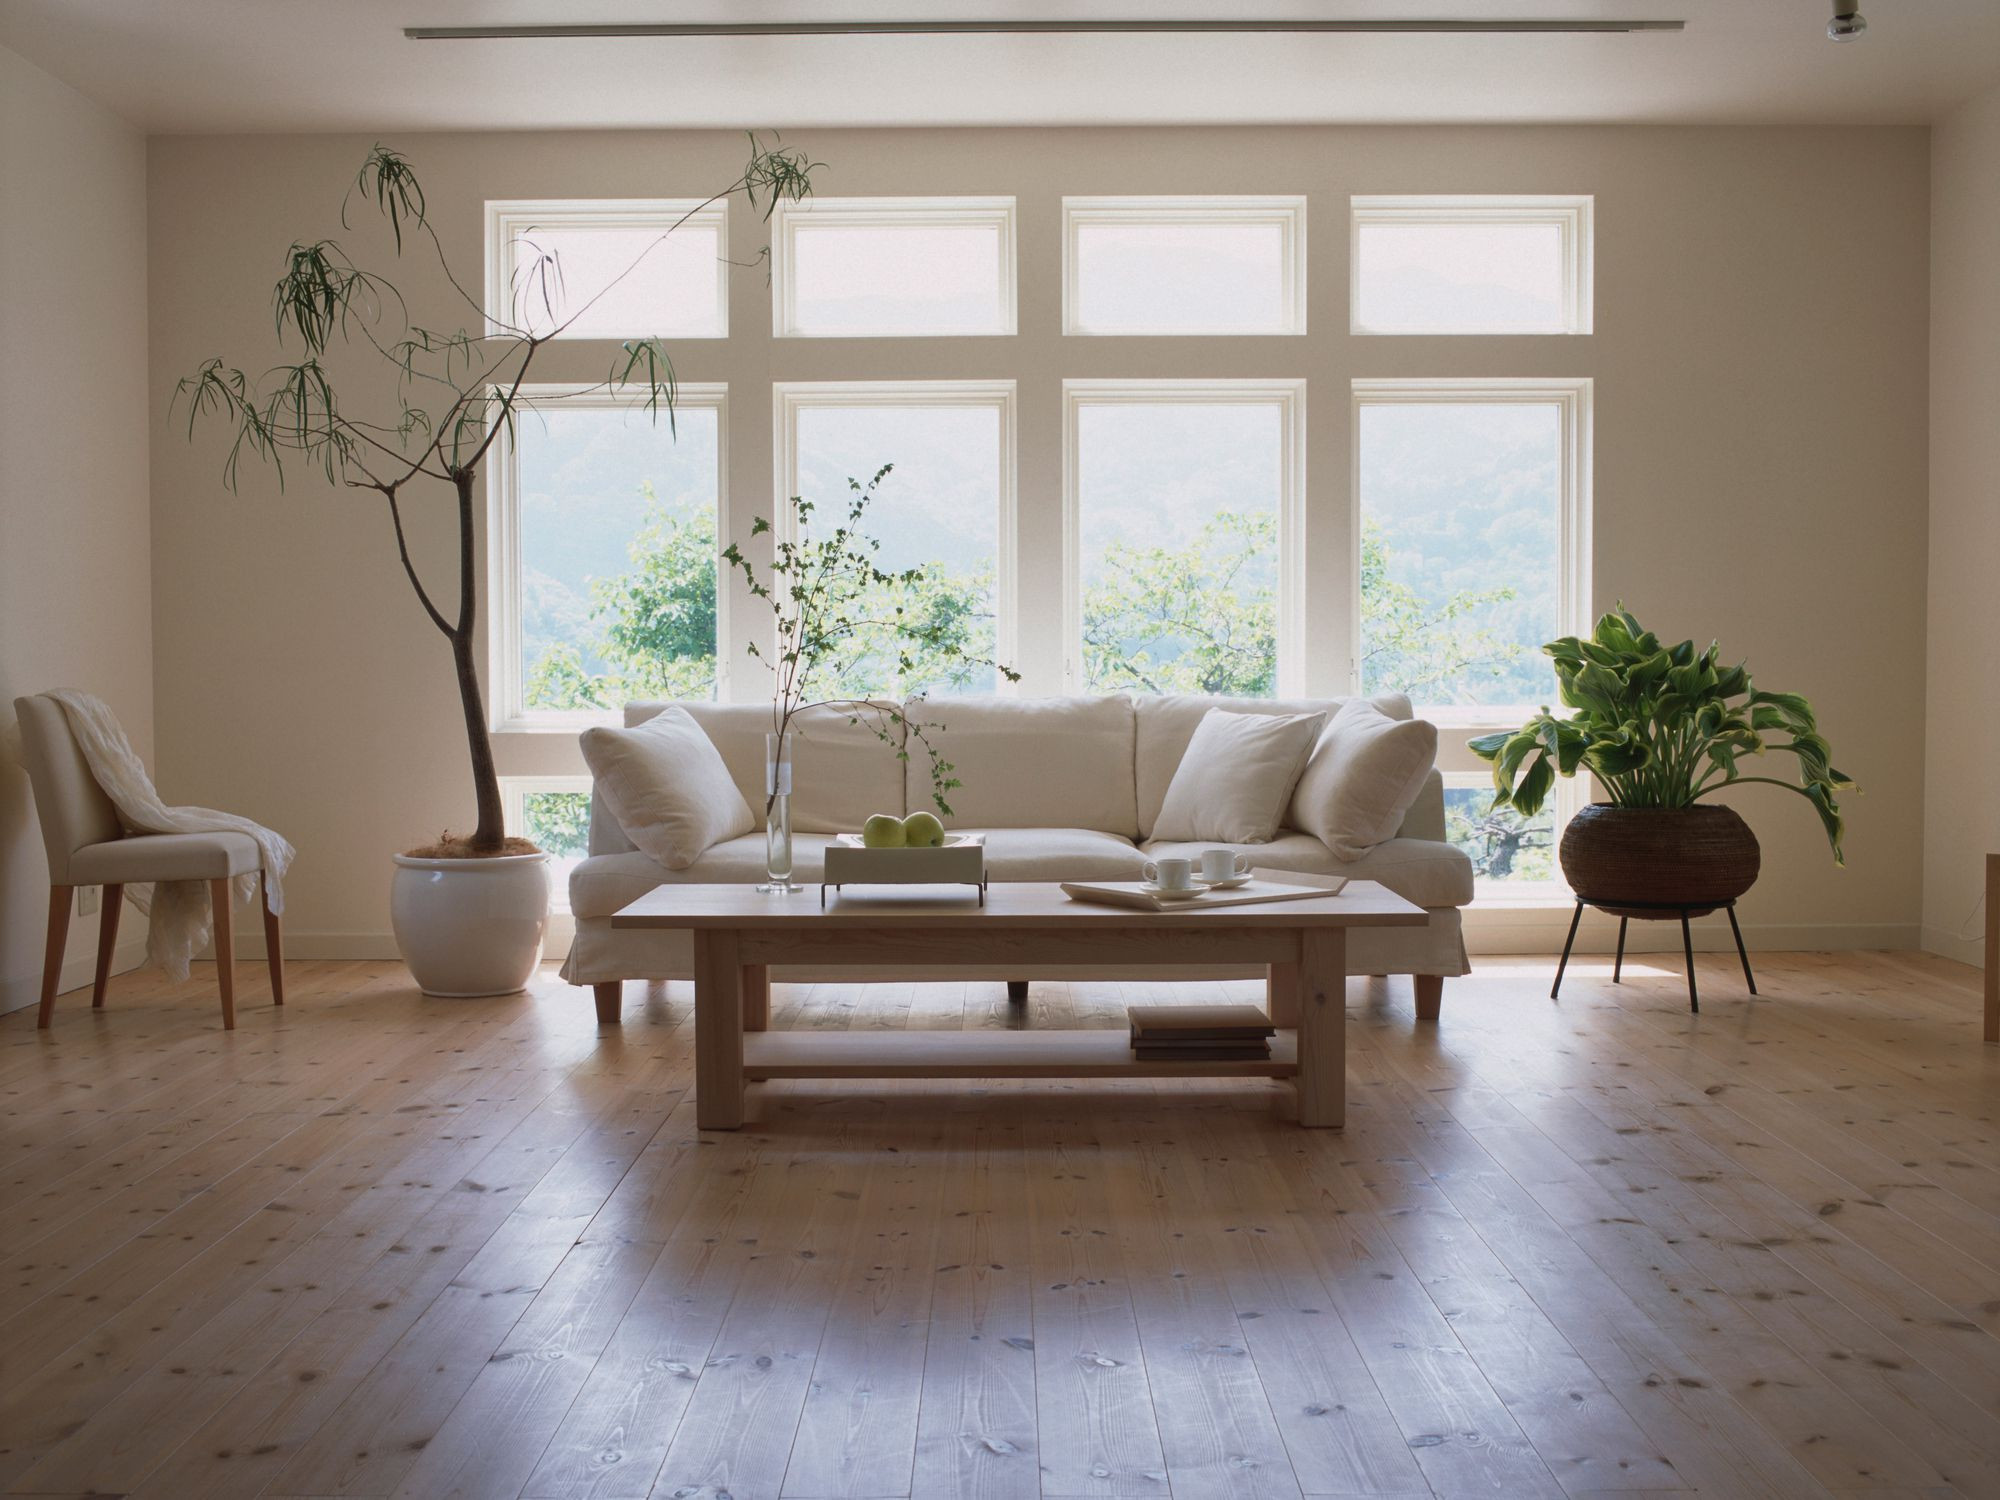 20 Fashionable Hardwood Floor Living Room Ideas 2024 free download hardwood floor living room ideas of laminate flooring pros and cons intended for living room laminate floor gettyimages dexph070 001 58b5cc793df78cdcd8be2938